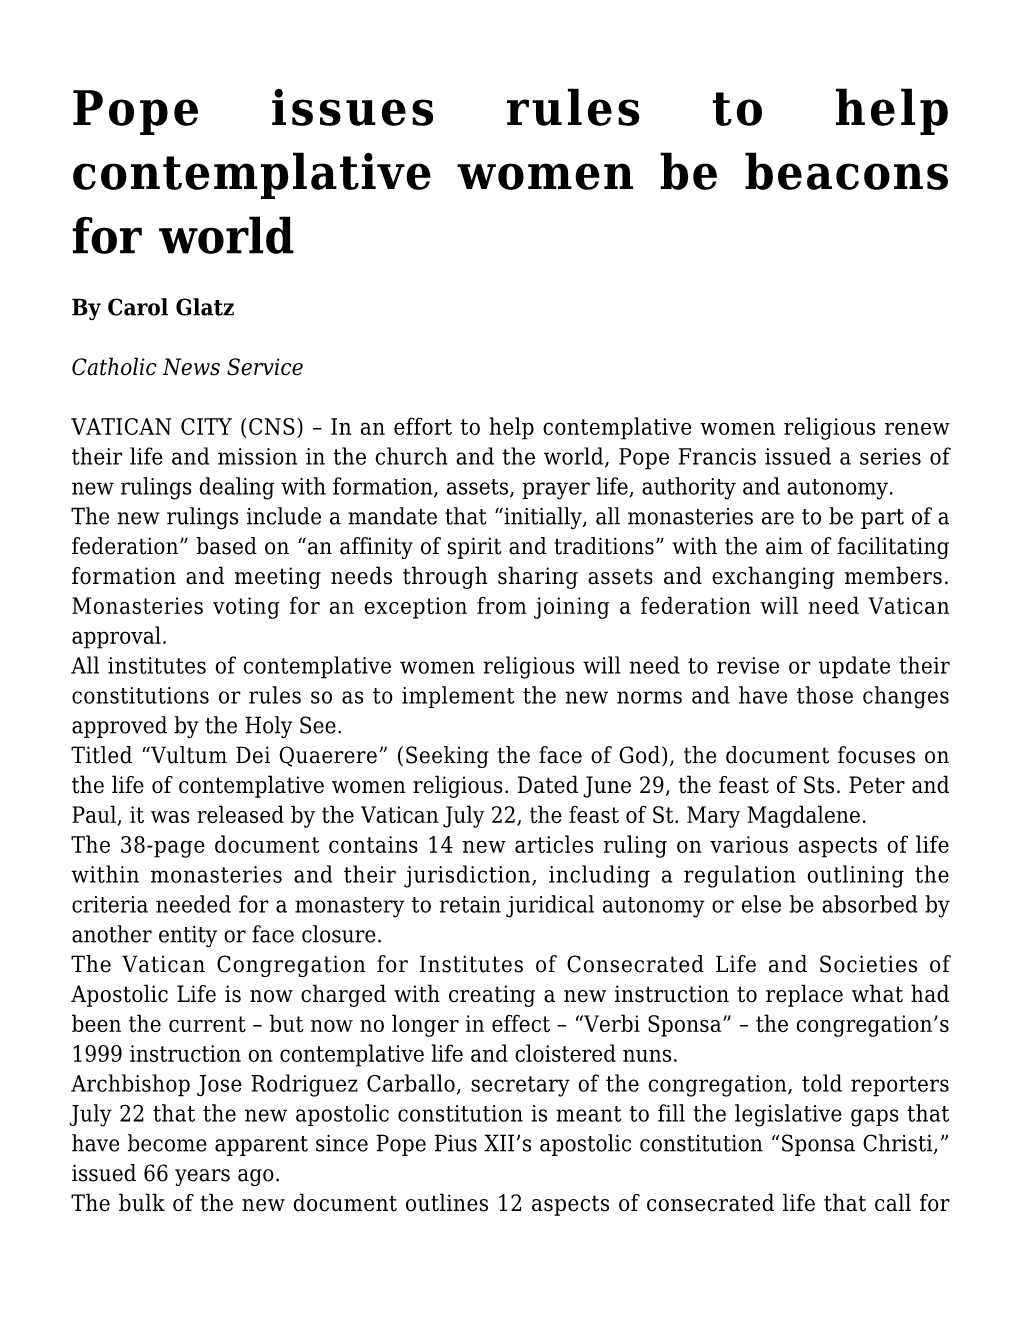 Pope Issues Rules to Help Contemplative Women Be Beacons for World